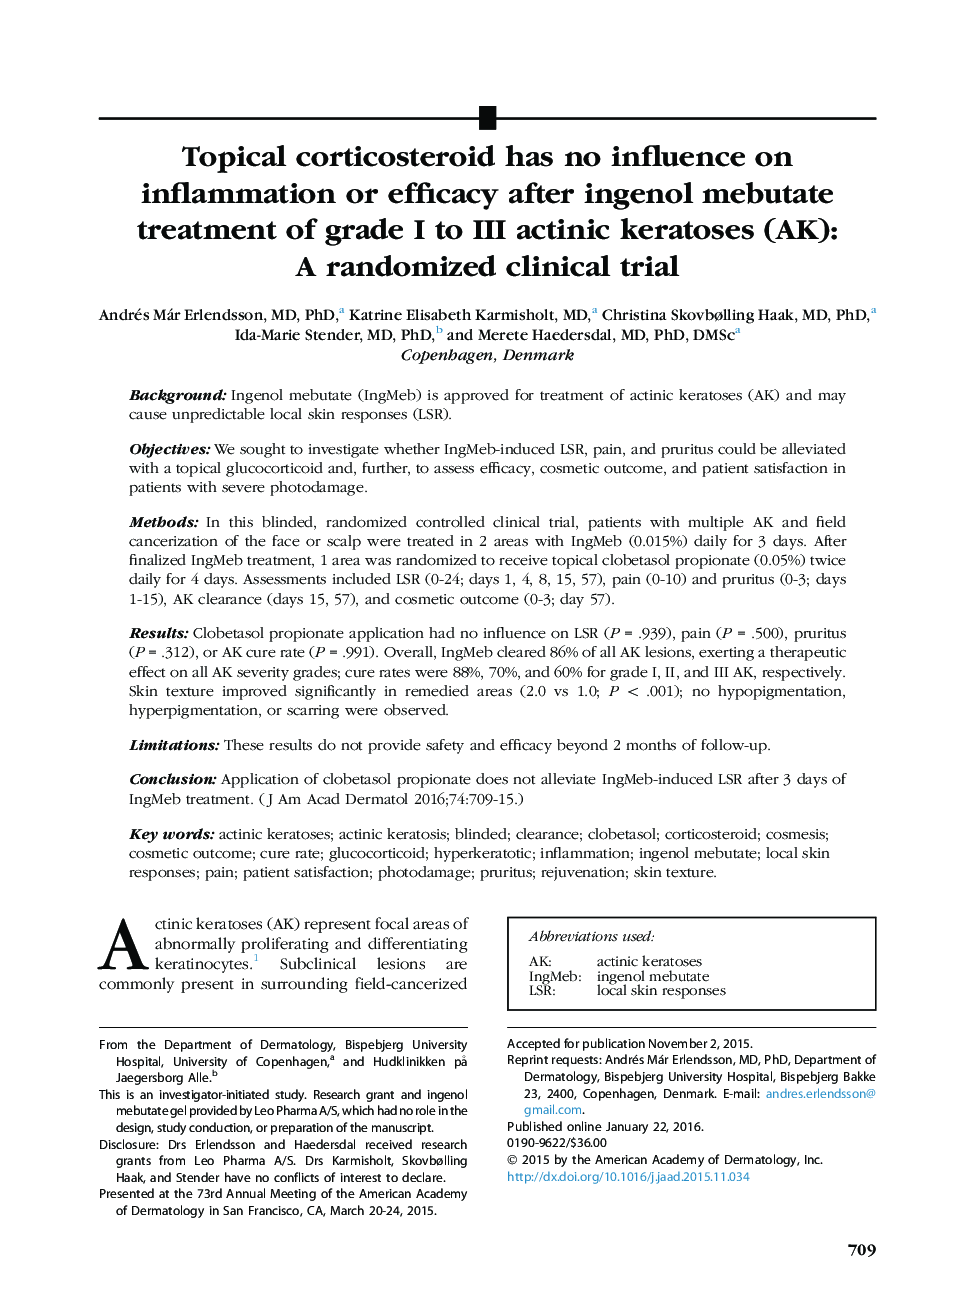 Topical corticosteroid has no influence on inflammation or efficacy after ingenol mebutate treatment of grade I to III actinic keratoses (AK): A randomized clinical trial 